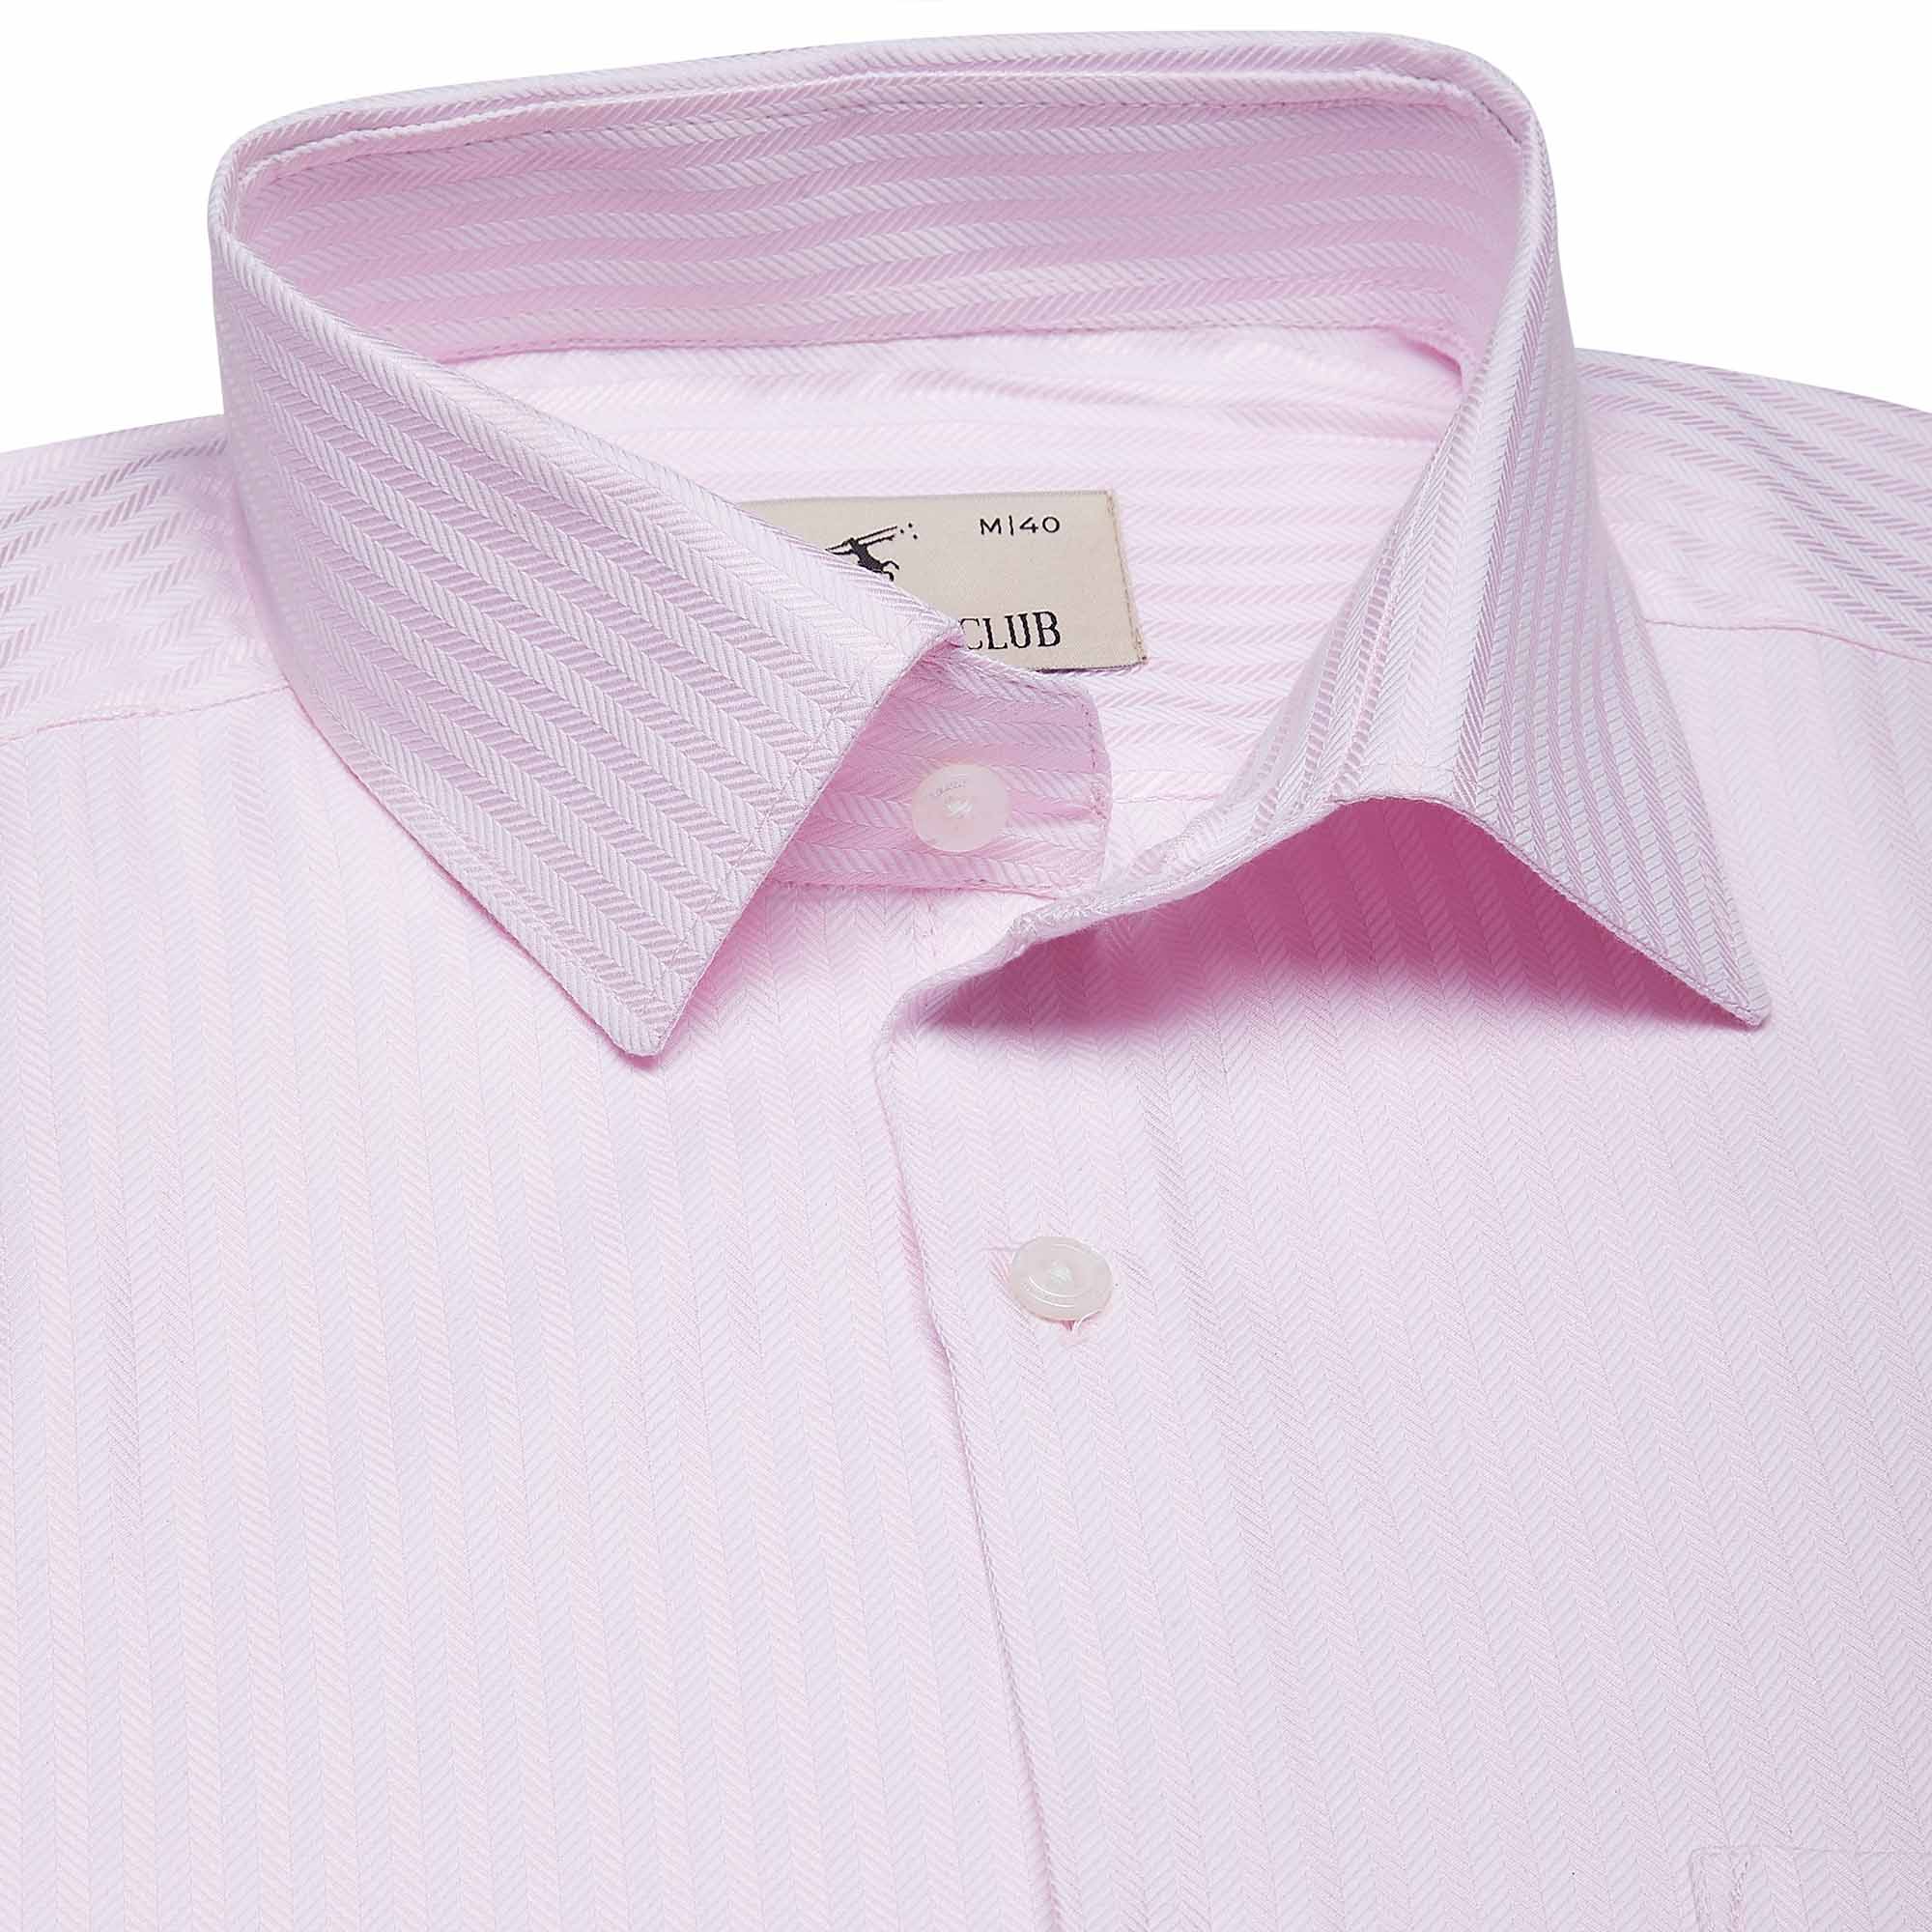 Enigma Self Stripes Shirt In Pink - The Formal Club